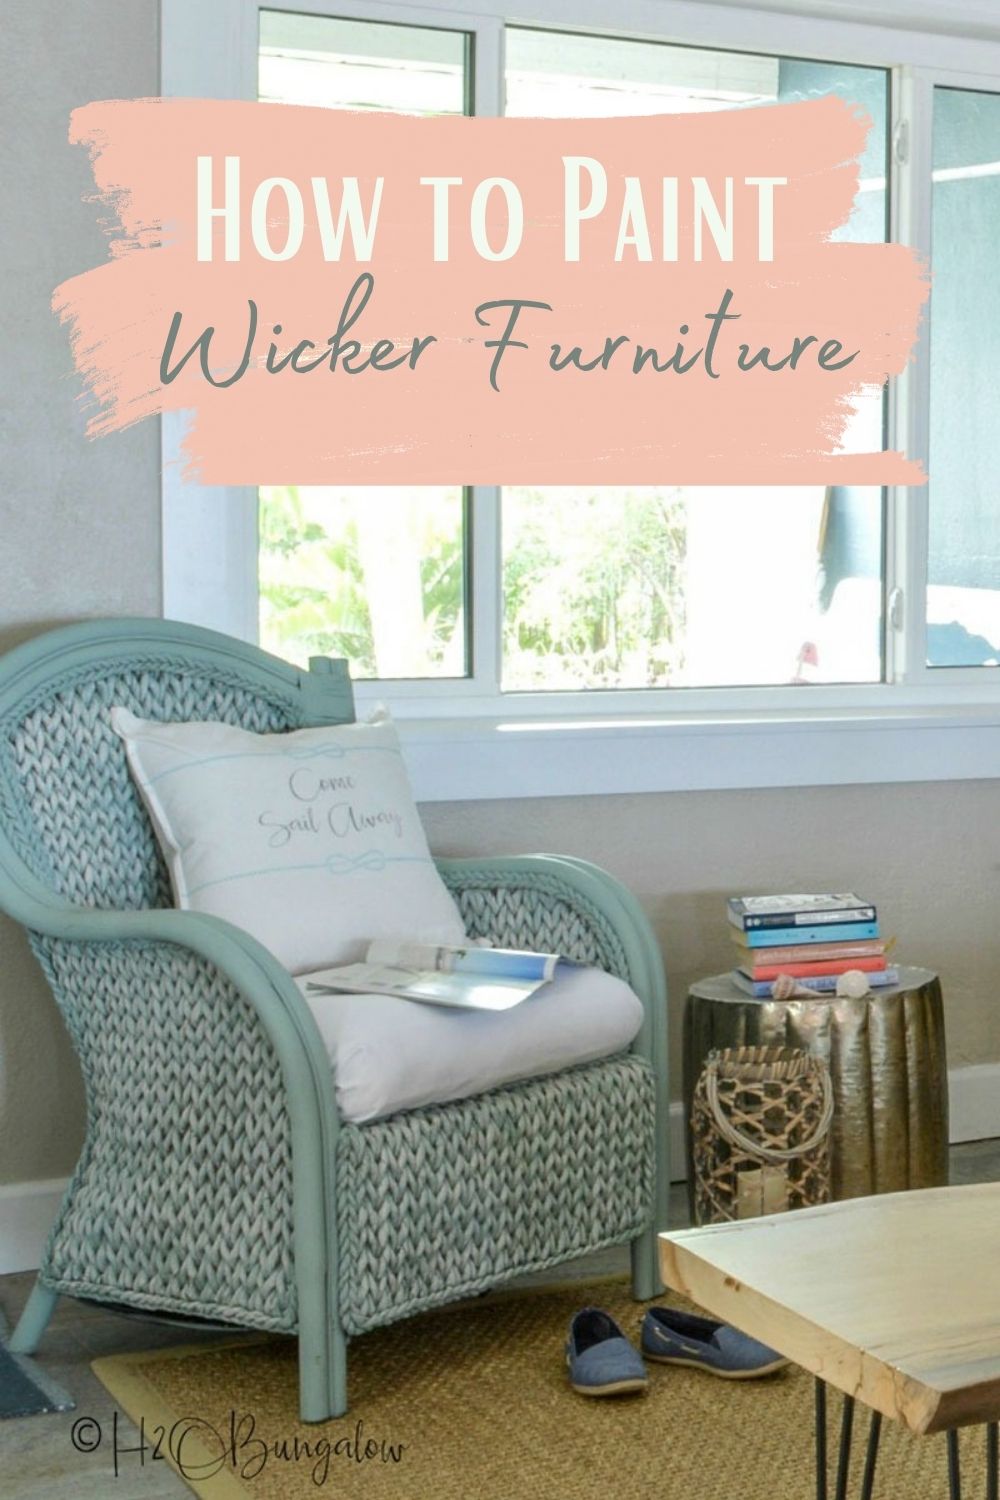 How To Paint Wicker Furniture Quickly and Easily - H2OBungalow